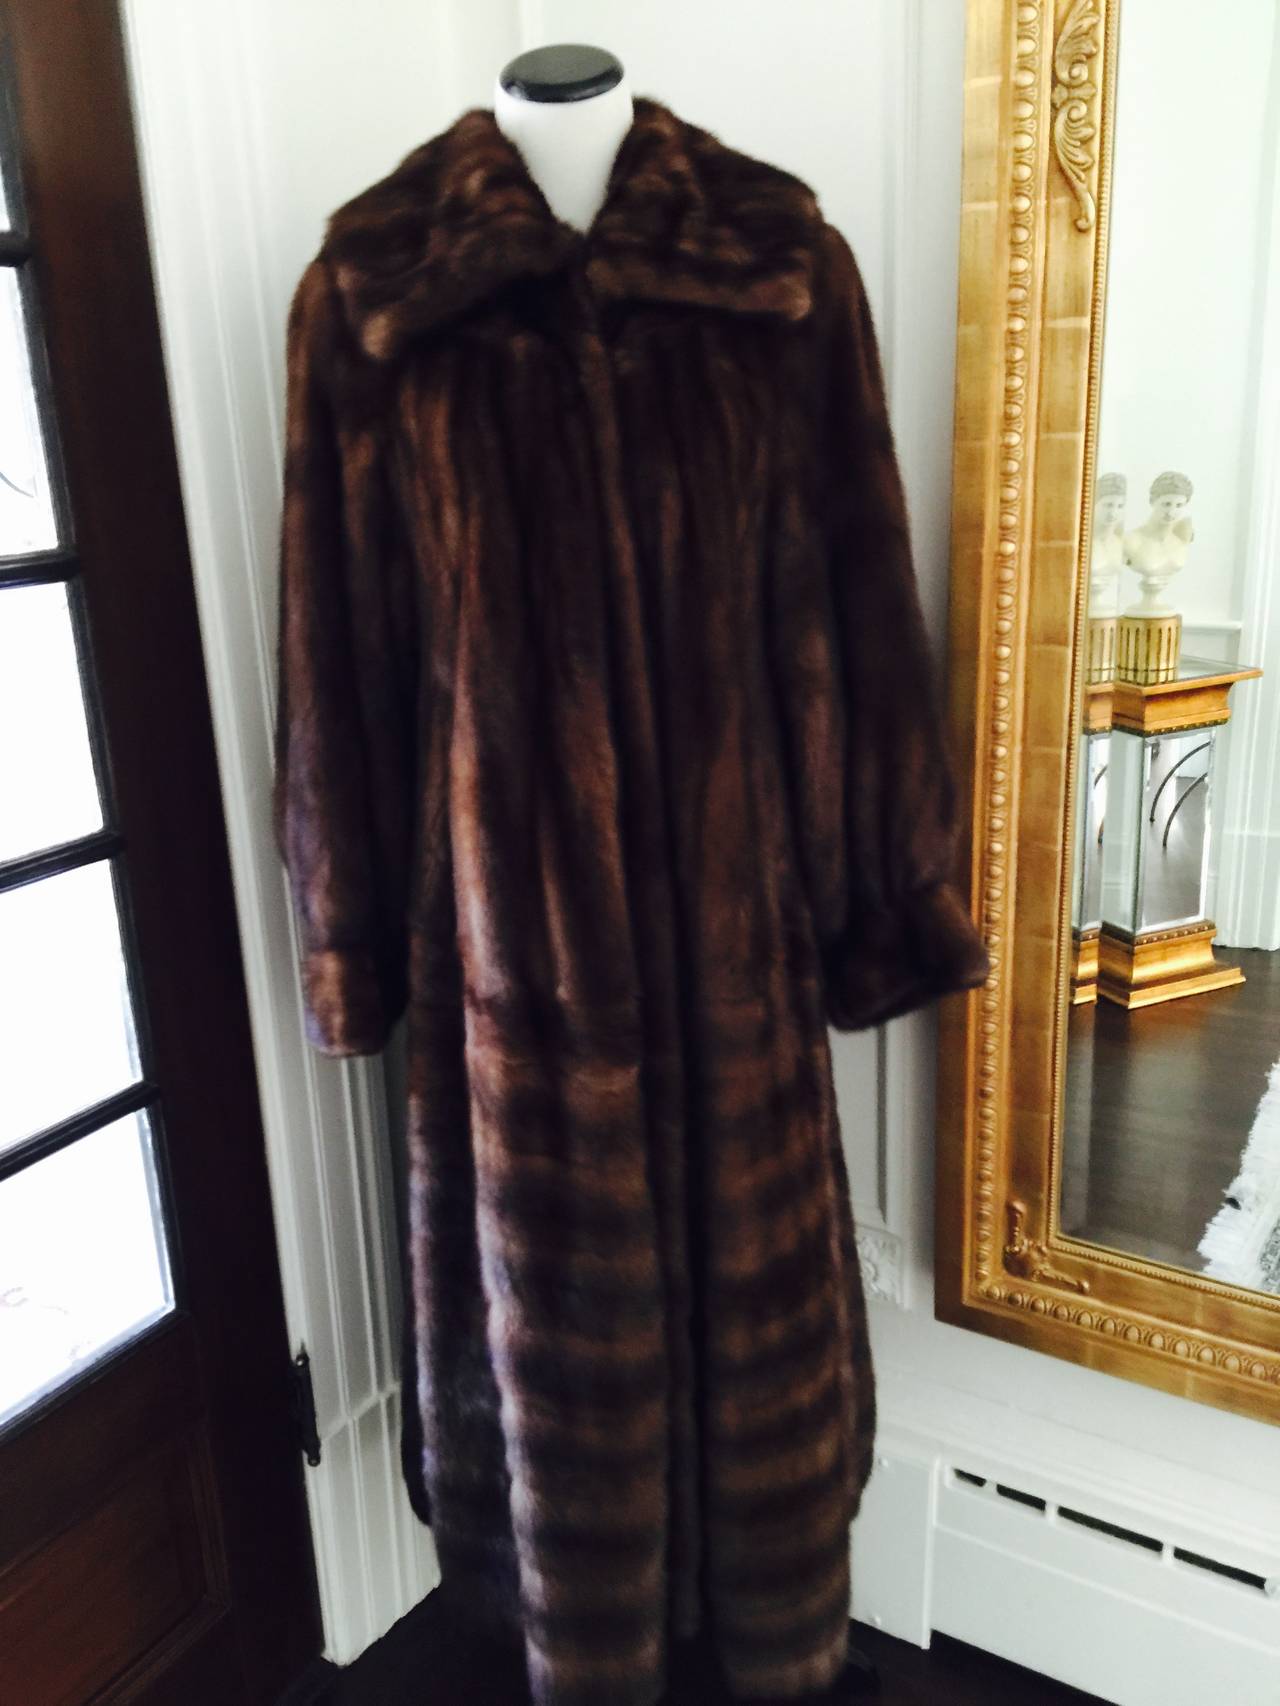 Designed by the master himself , Karl Lagerfeld ,
and manufactured in Canada by the finest fourrier this coat 
is stunning and luxurious...